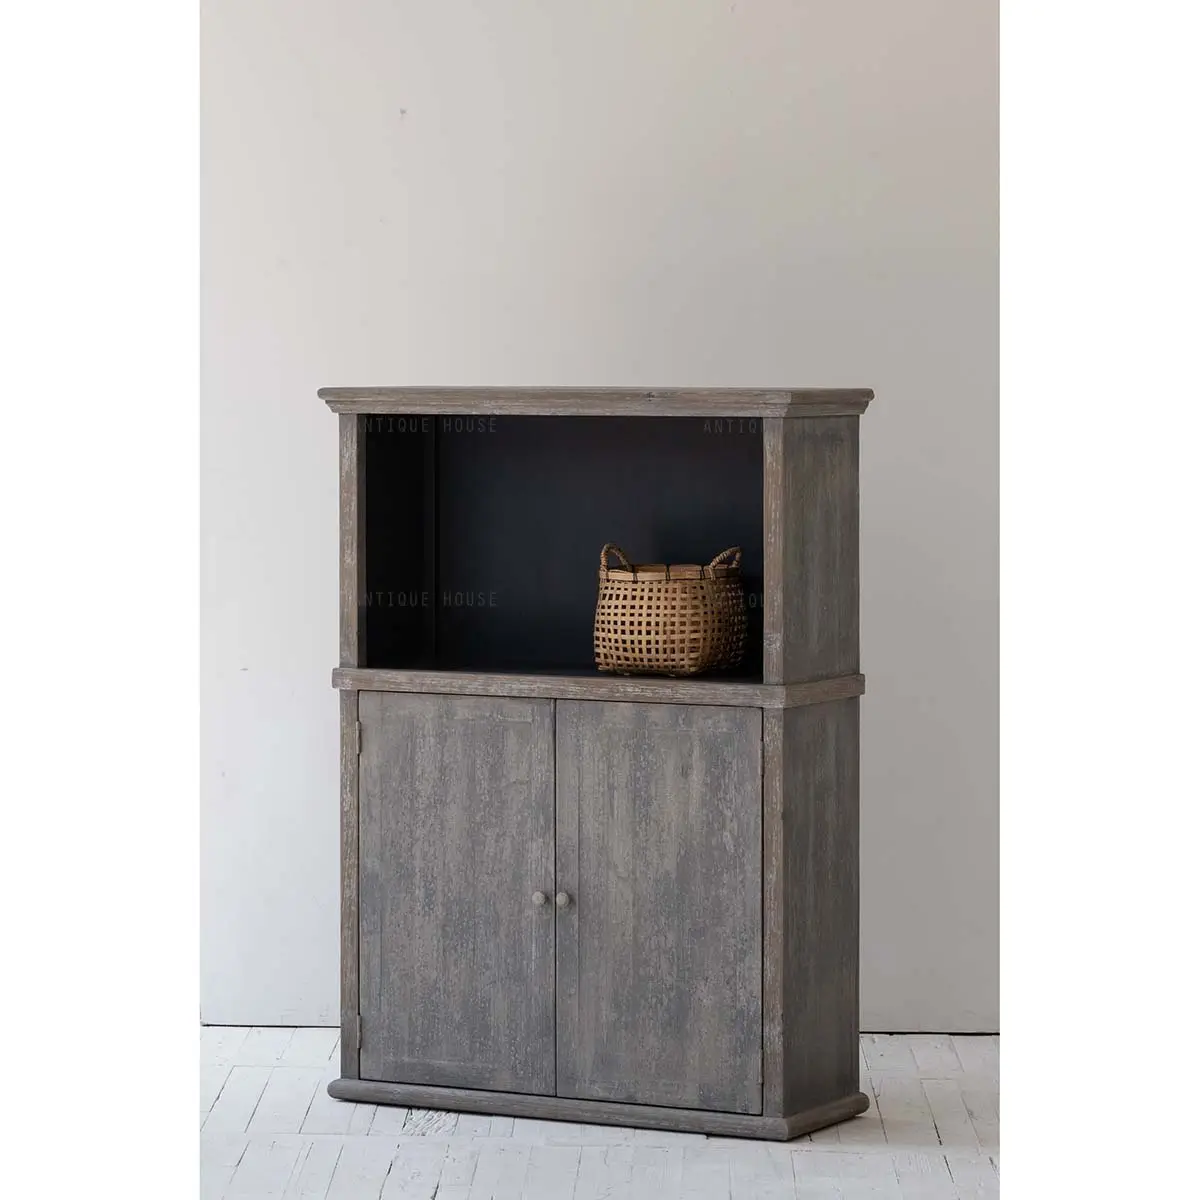 Antique Furniture Authentic Furniture Reclaimed Wood Furniture Living Room Cabinets Kast Wood Cabinets Storage Cabinet